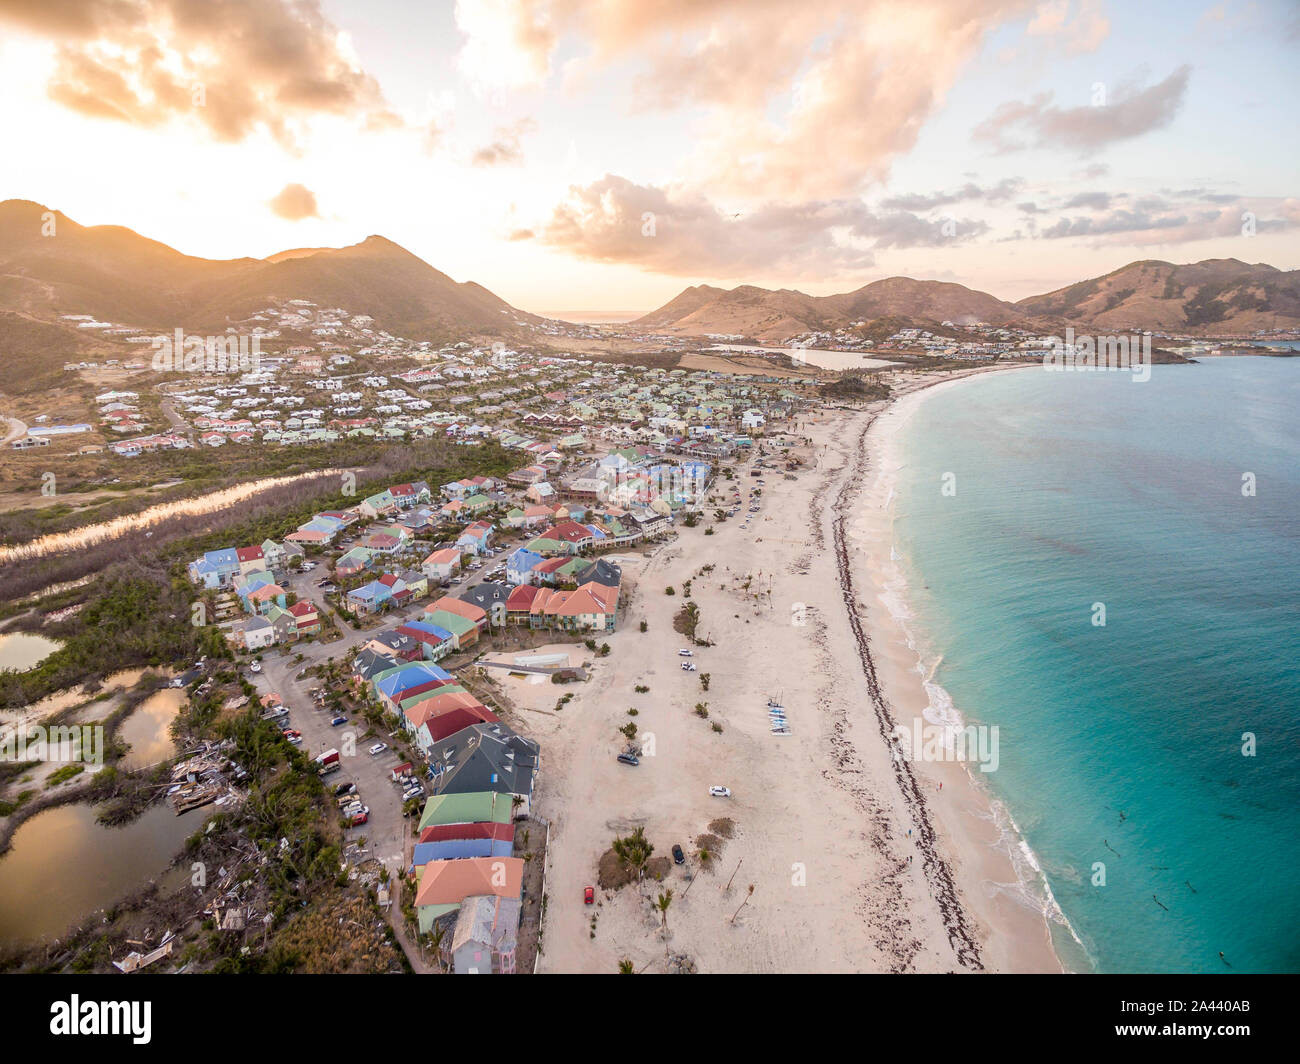 Beautiful view of orient bay beach on st.martin. Aerial view after getting damage by hurricane Irma. Stock Photo